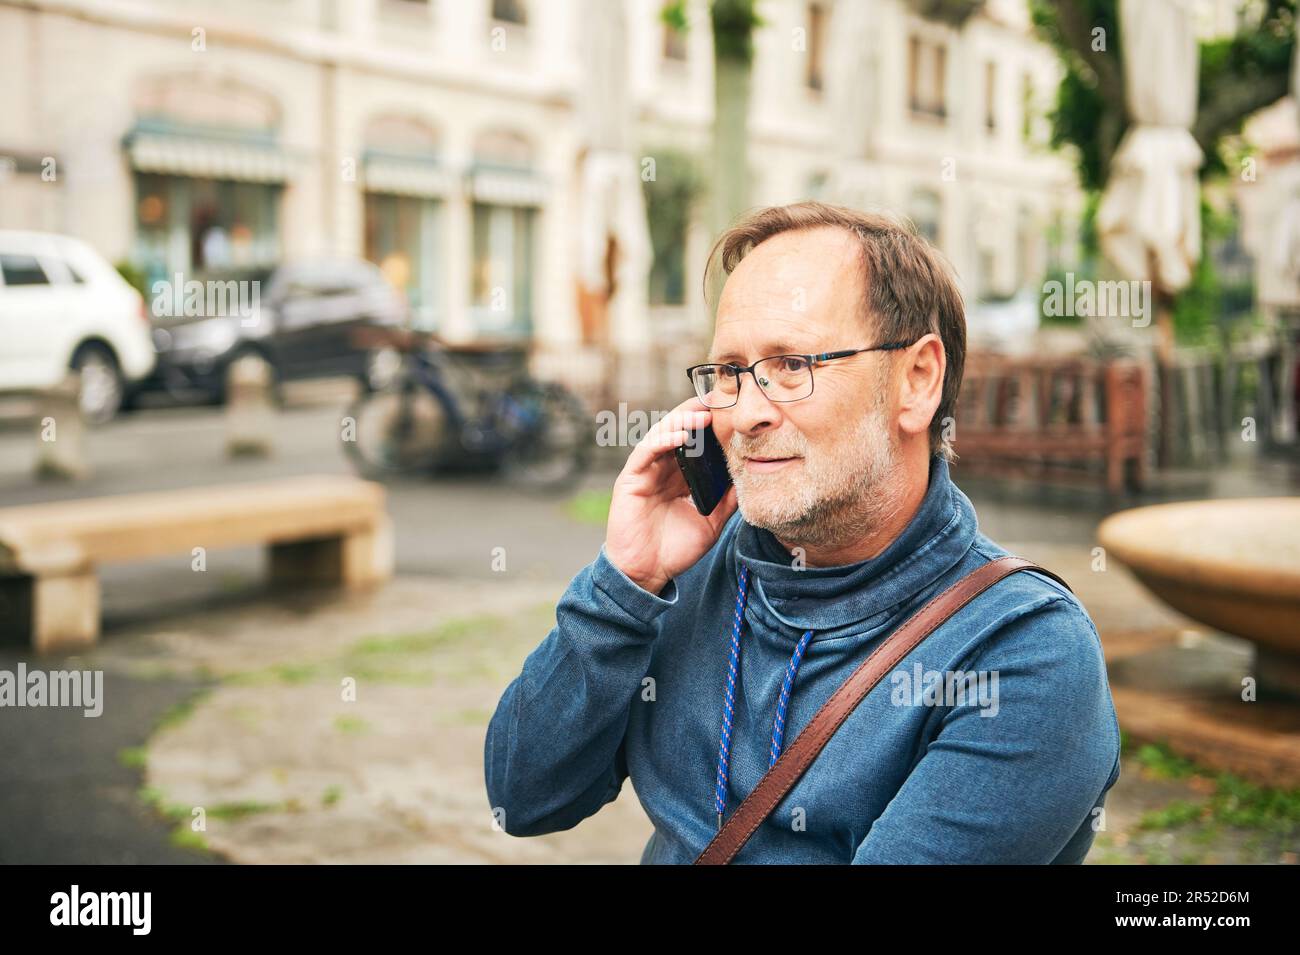 Outdoor portrait of middle age man talking on the phone, wearing glasses and blue sweatshirt, holding smartphone next to ear Stock Photo